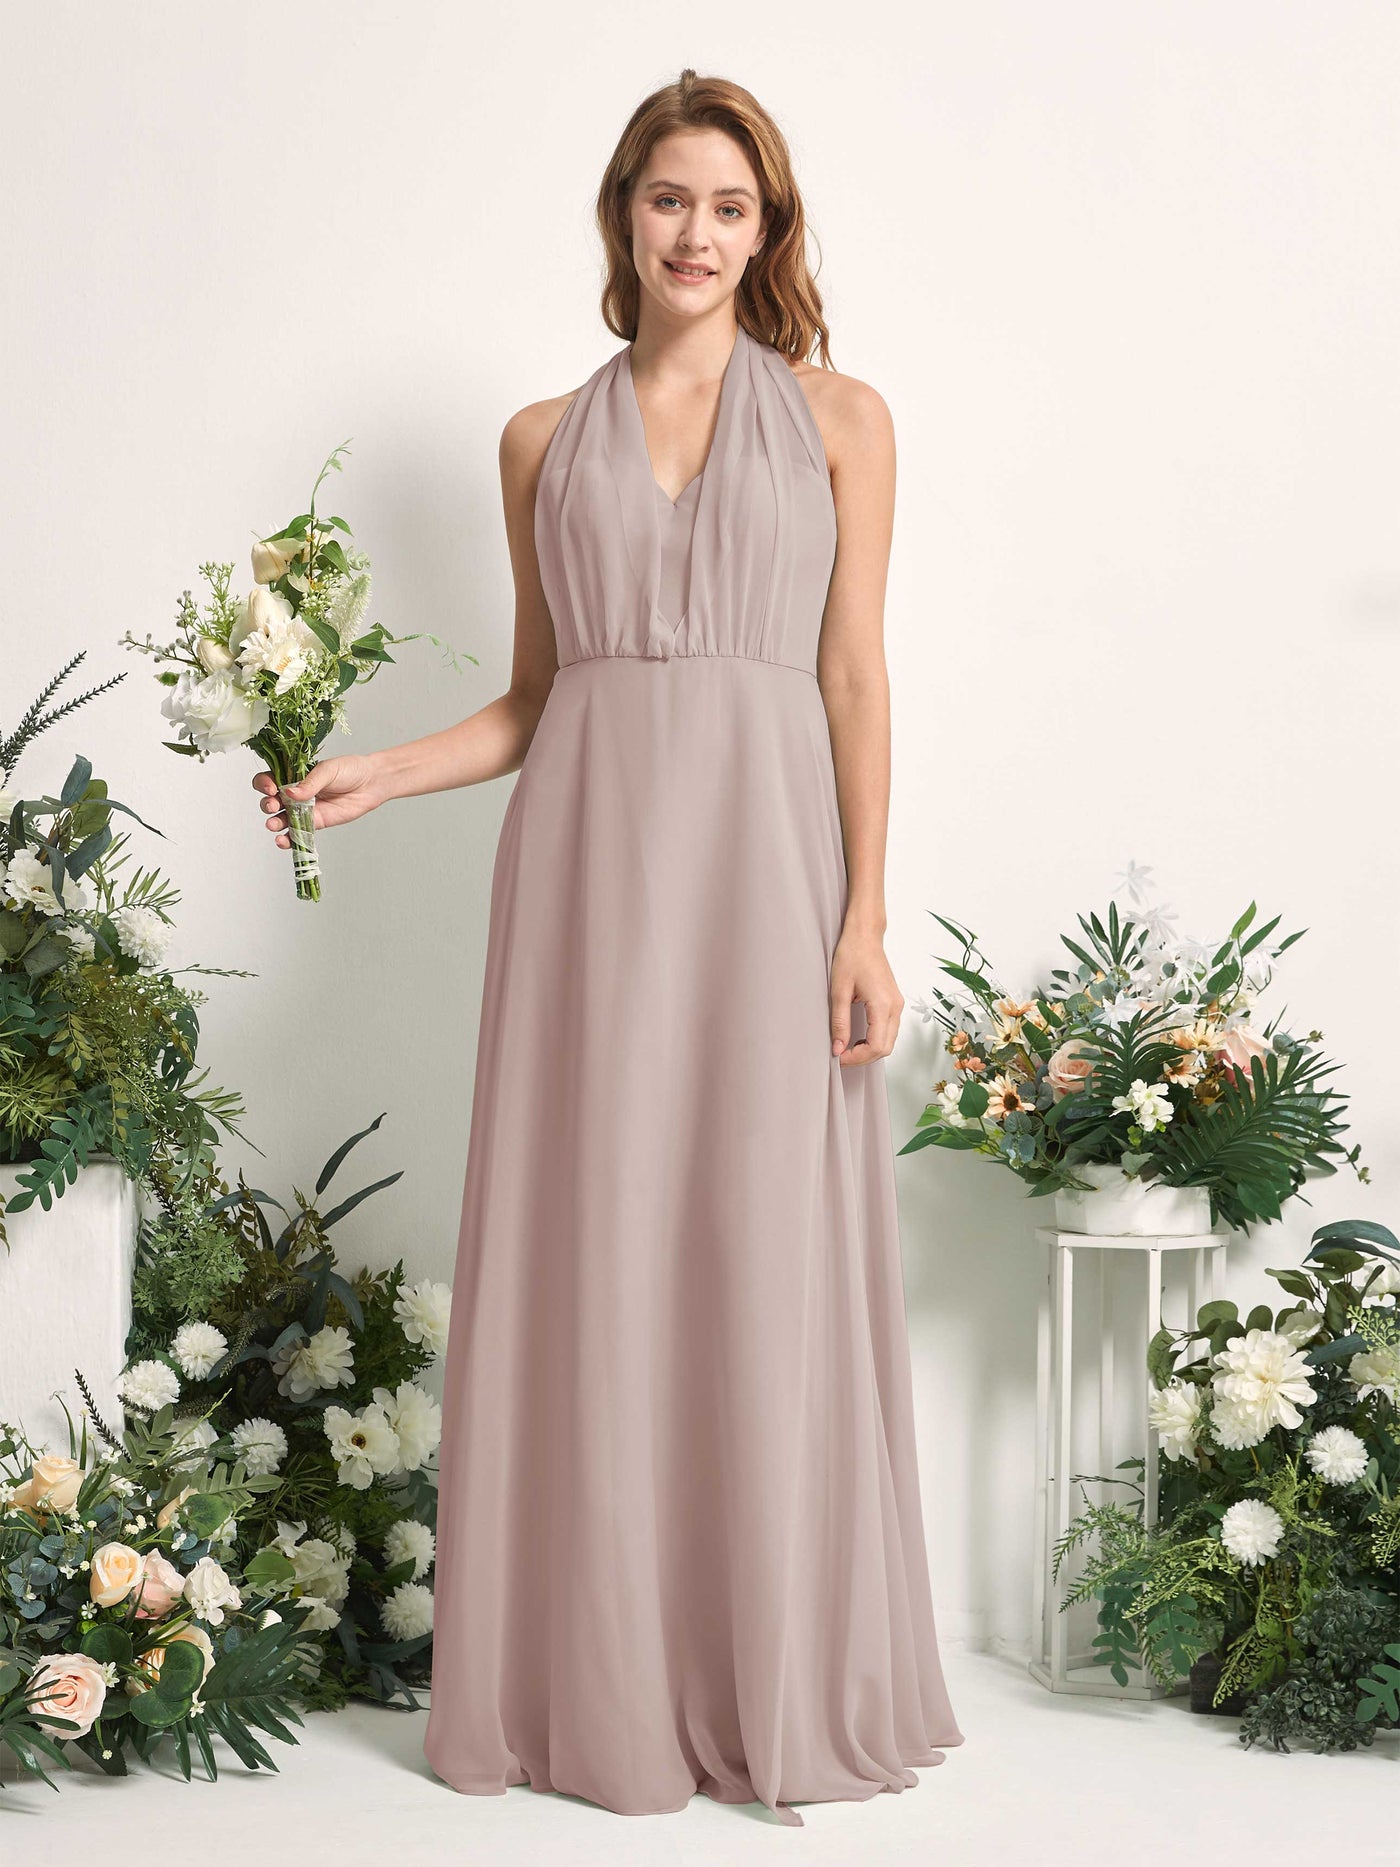 Taupe Bridesmaid Dresses Bridesmaid Dress A-line Chiffon Halter Full Length Short Sleeves Wedding Party Dress (81226324)#color_taupe